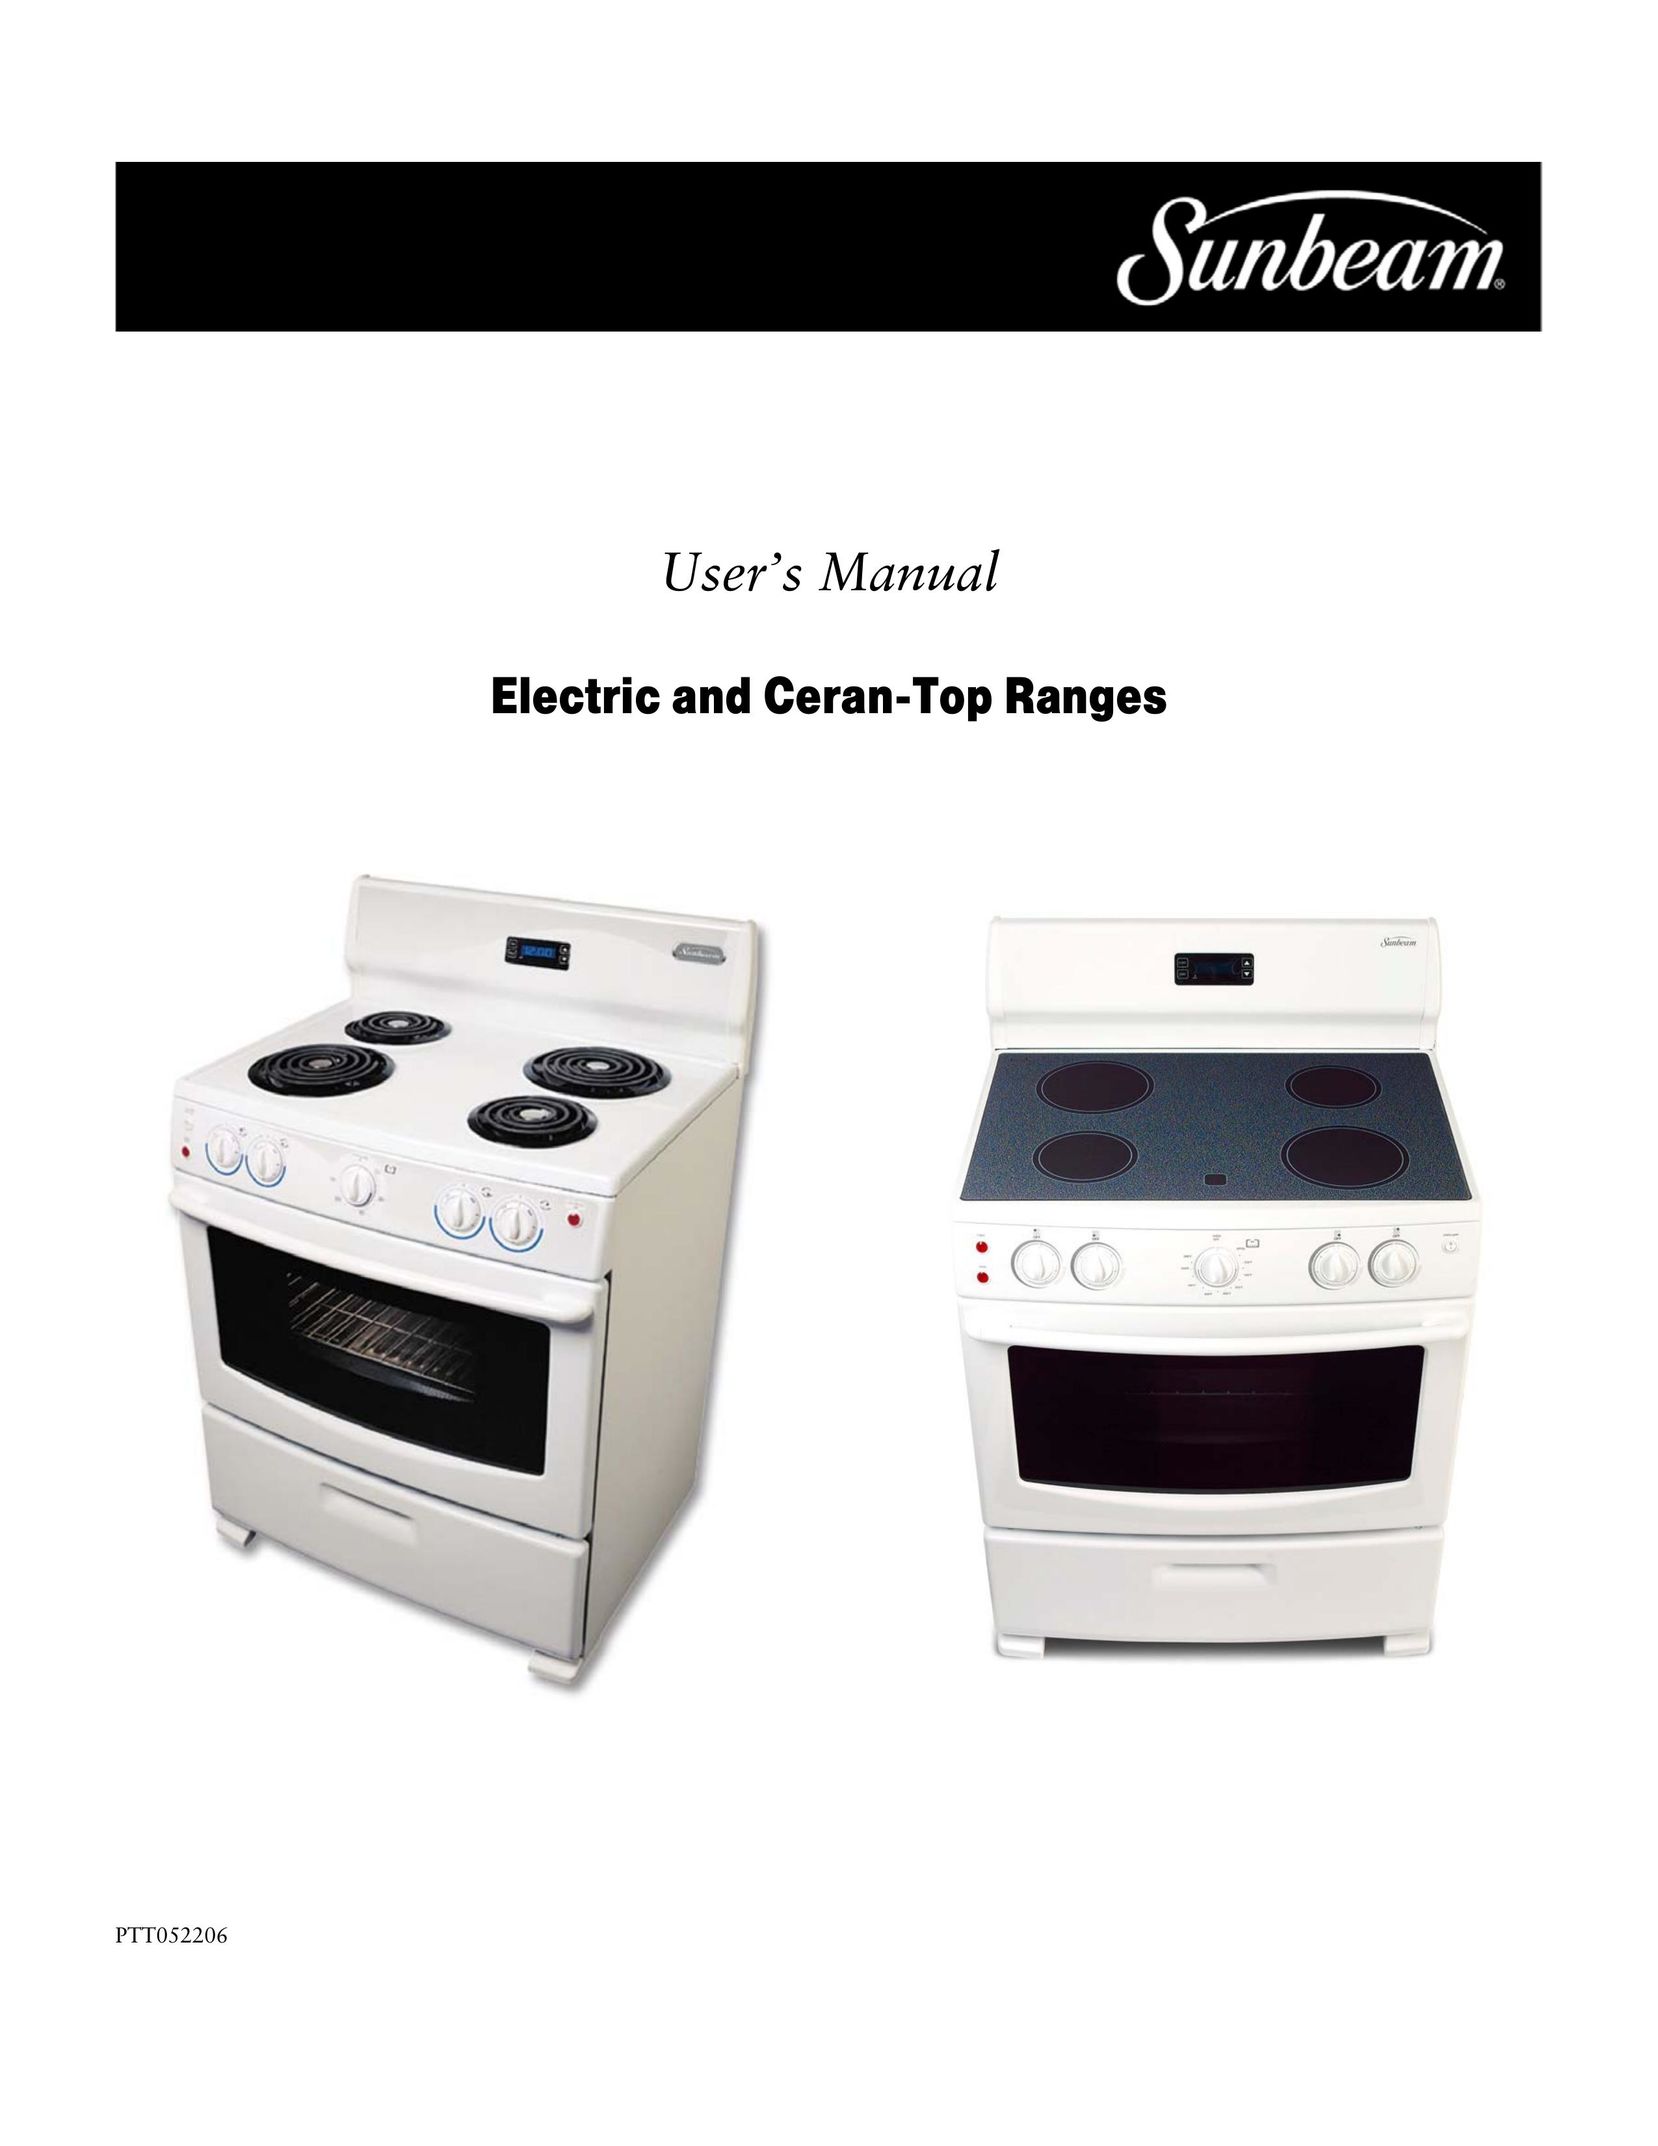 Jarden consumer Solutions Electric and Ceran-Top Ranges Range User Manual